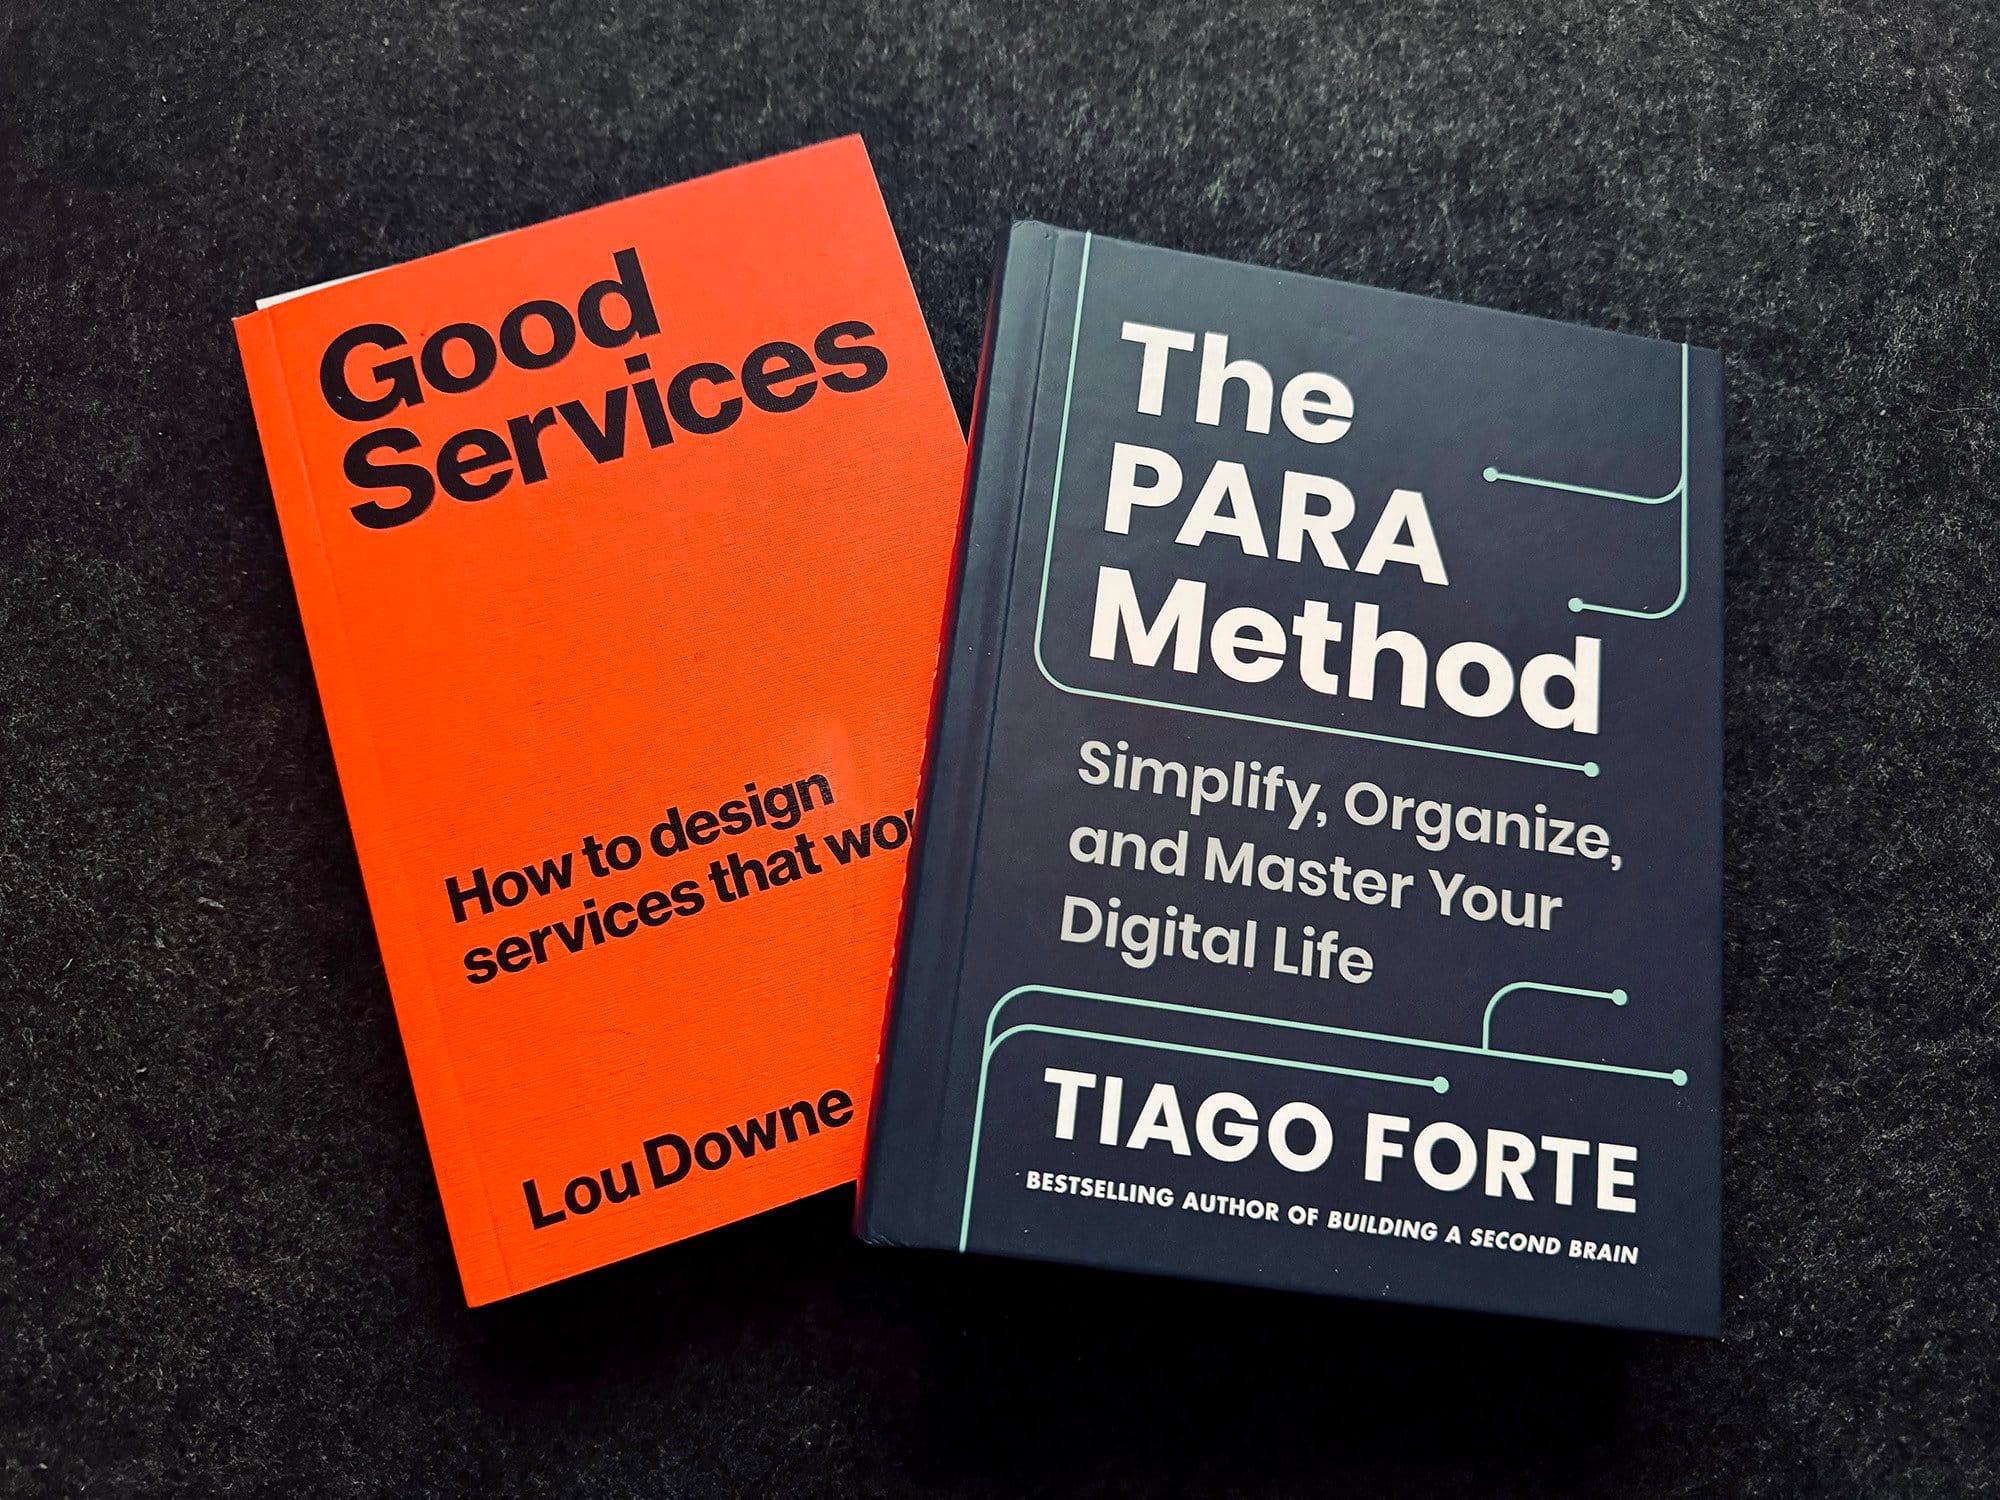  Two books titled “Good Services: How to design services that work” by Lou Downe and “The PARA Method: Simplify, Organize, and Master Your Digital Life” by Tiago Forte, lying on a dark surface